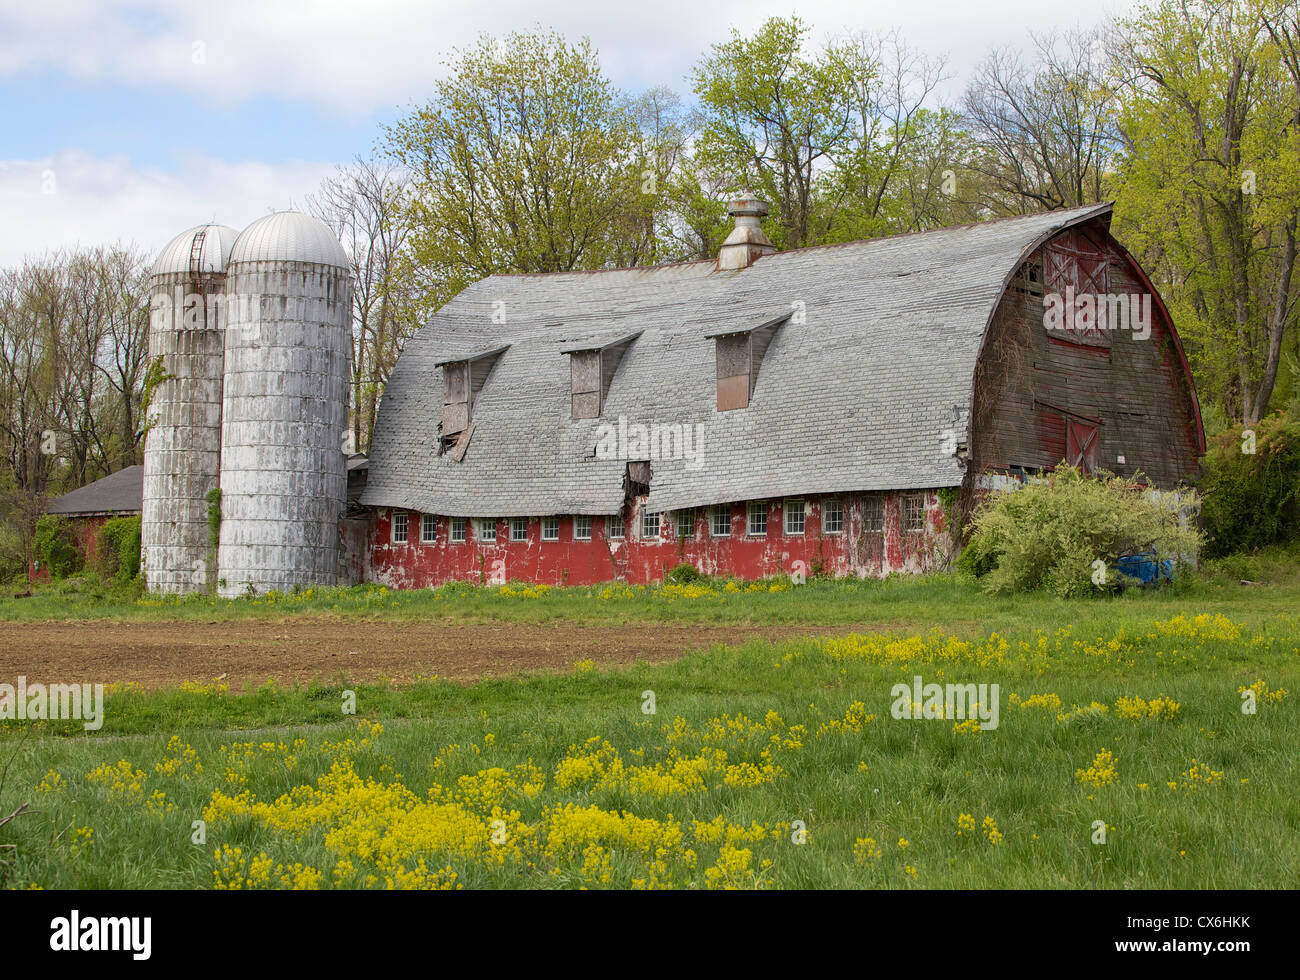 Weathered Red Farm Barn with Grain Silos Stock Photo